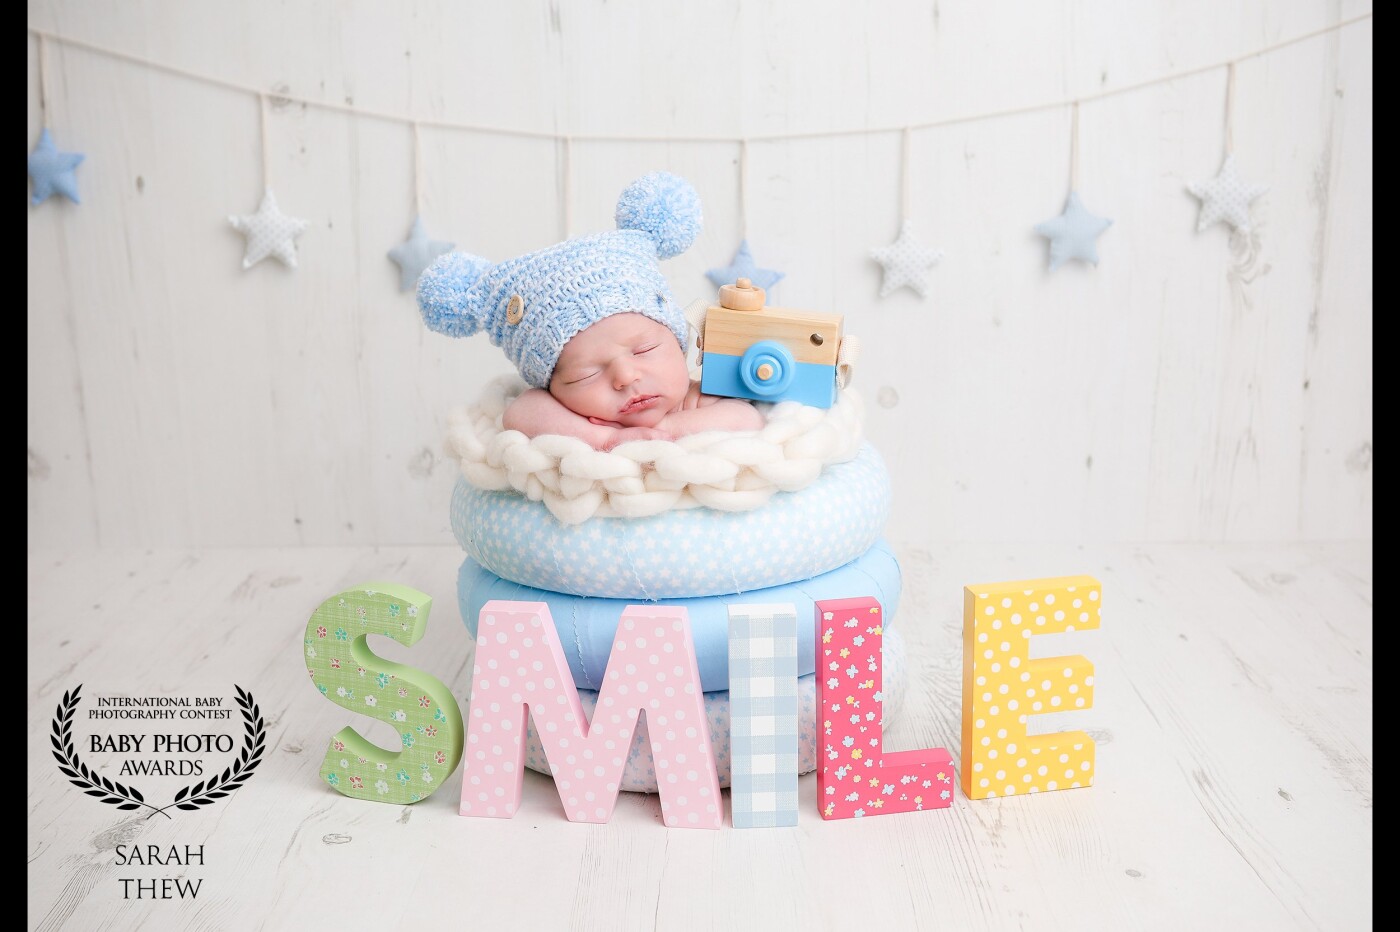 How cute is this little chap! He was a dream to work with and Mummy loved the idea of adding a camera and SMILE into the shoot, my sister bought me the camera as a gift!  <br />
Love working with new ideas. <br />
sarahthew.co.uk